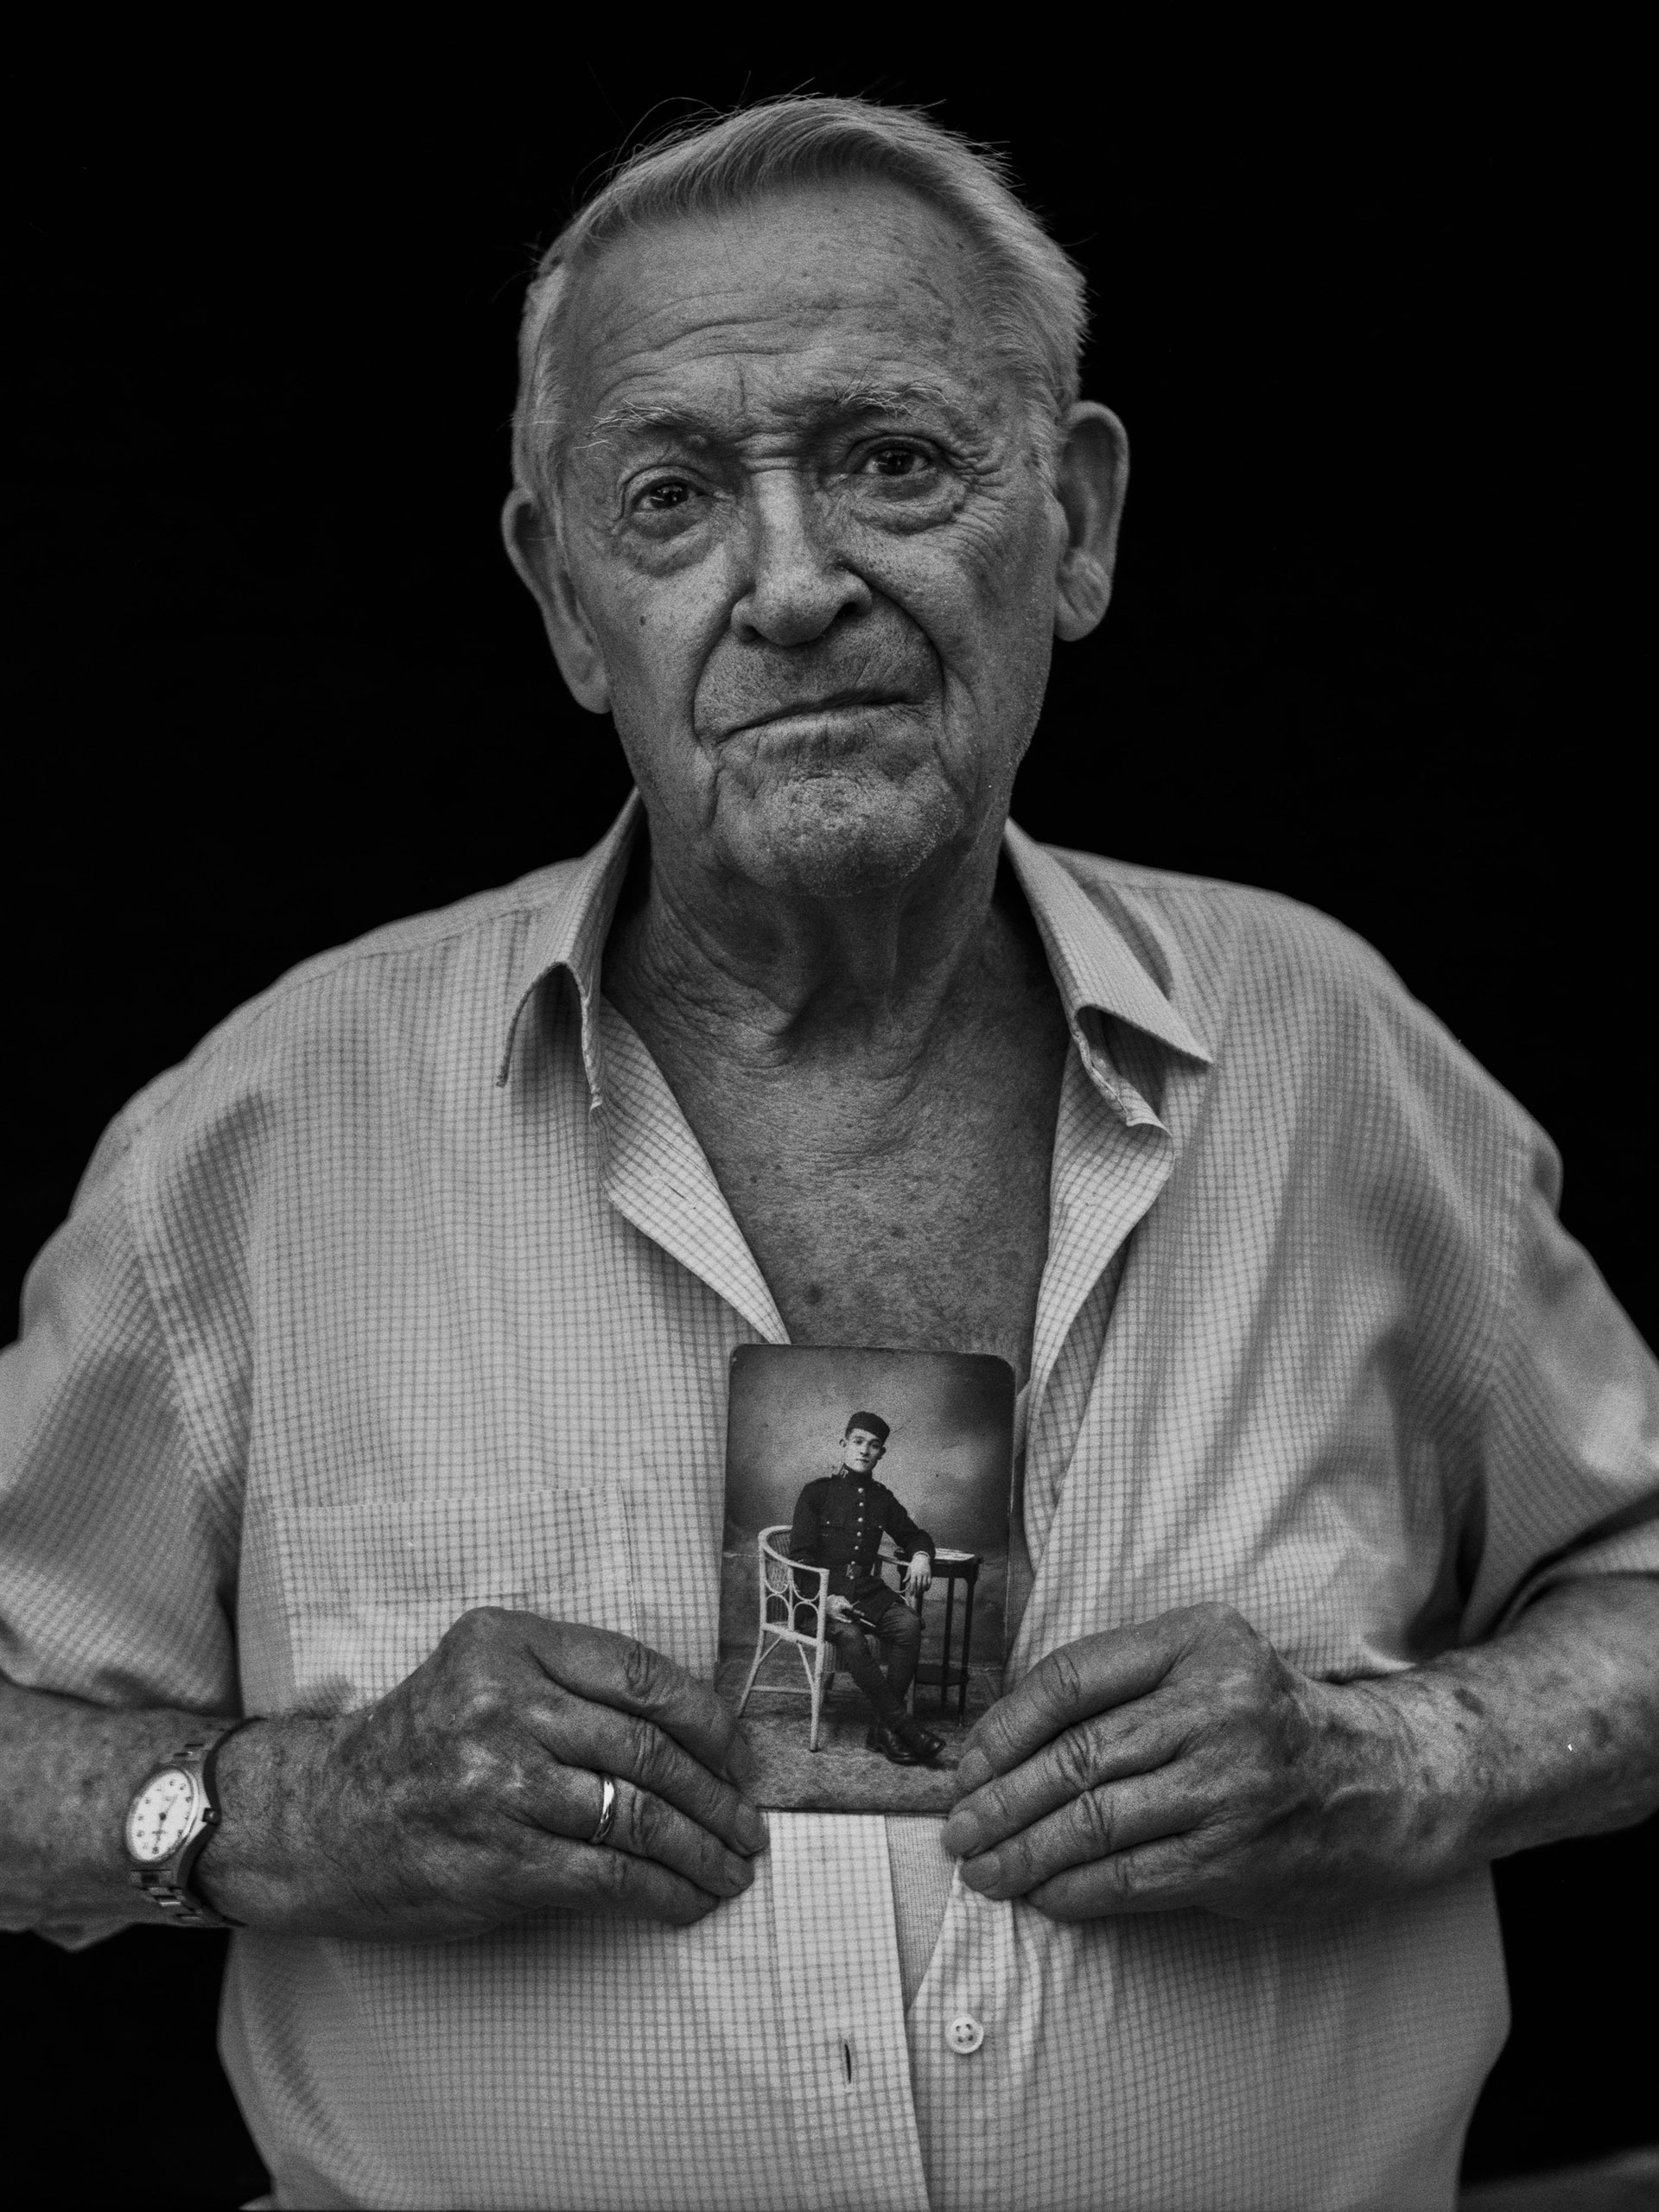 Juan Guirao holds the photograph of his father, killed in 1940 and buried in the mass grave in the cemetery in Paterna, Valencia. Juan, who suffered from Alzheimer’s disease, passed away on 28 February 2019.